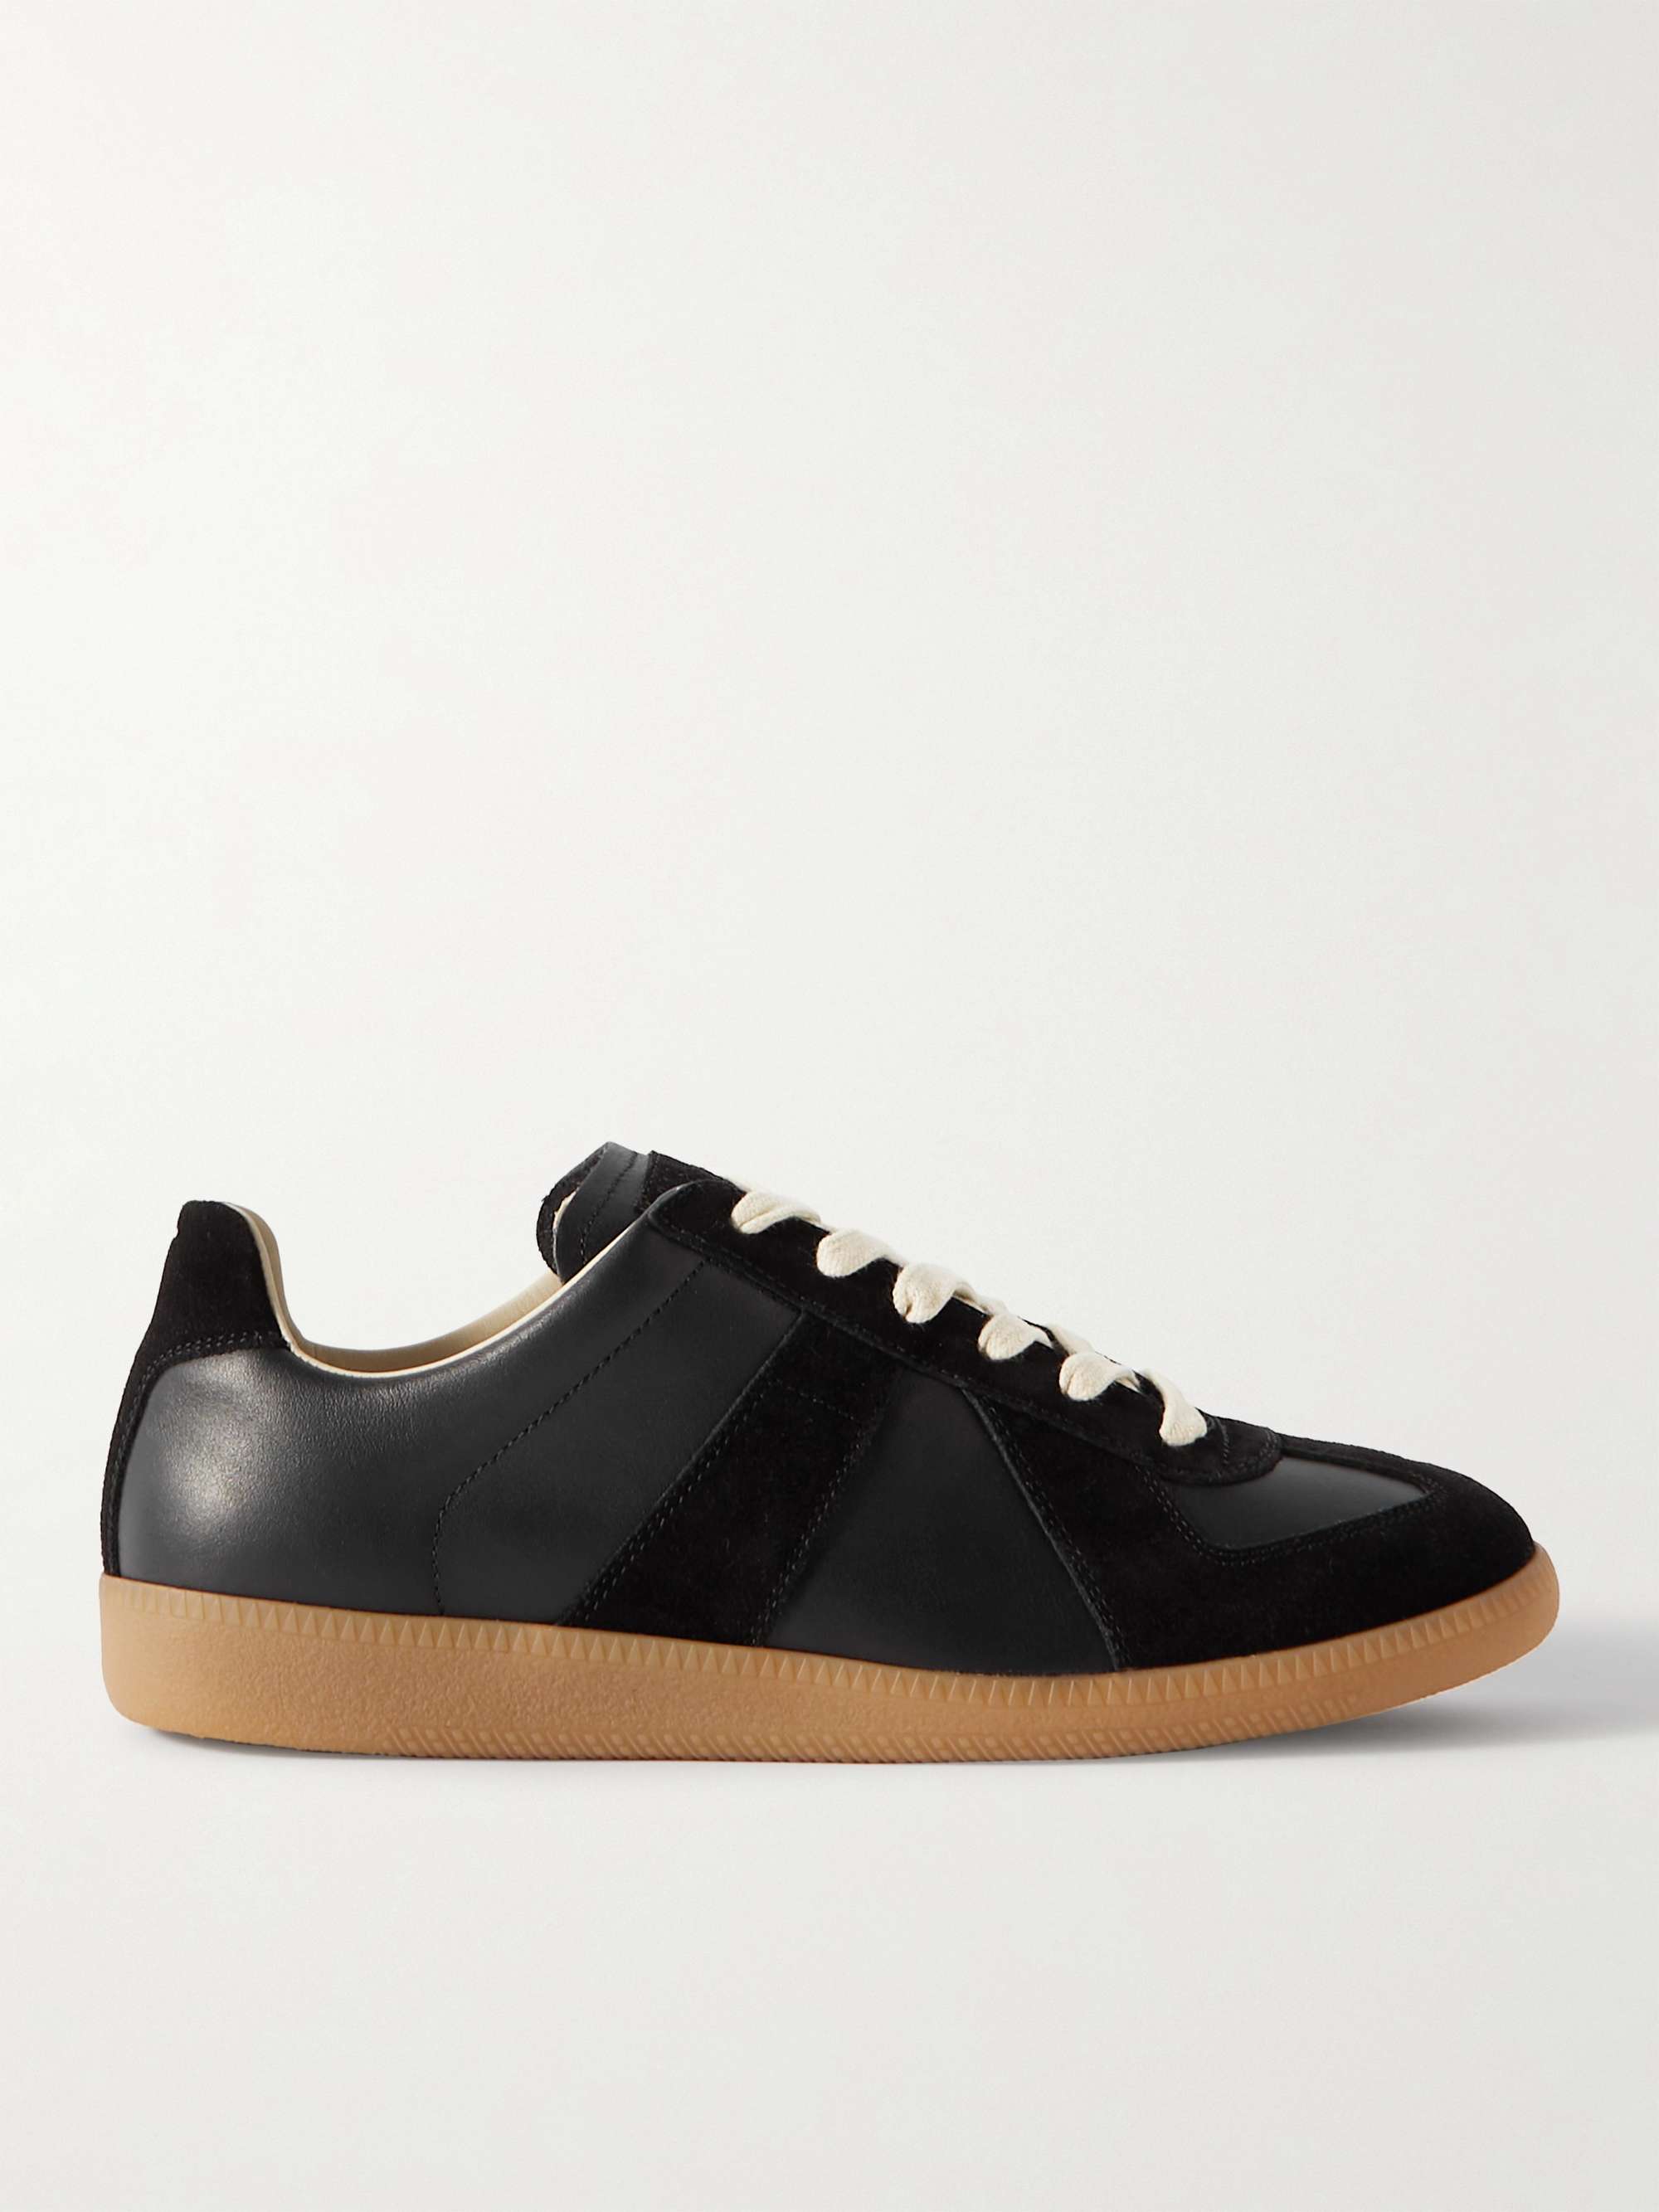 trofast mod Piping MAISON MARGIELA Replica Leather and Suede Sneakers for Men | MR PORTER